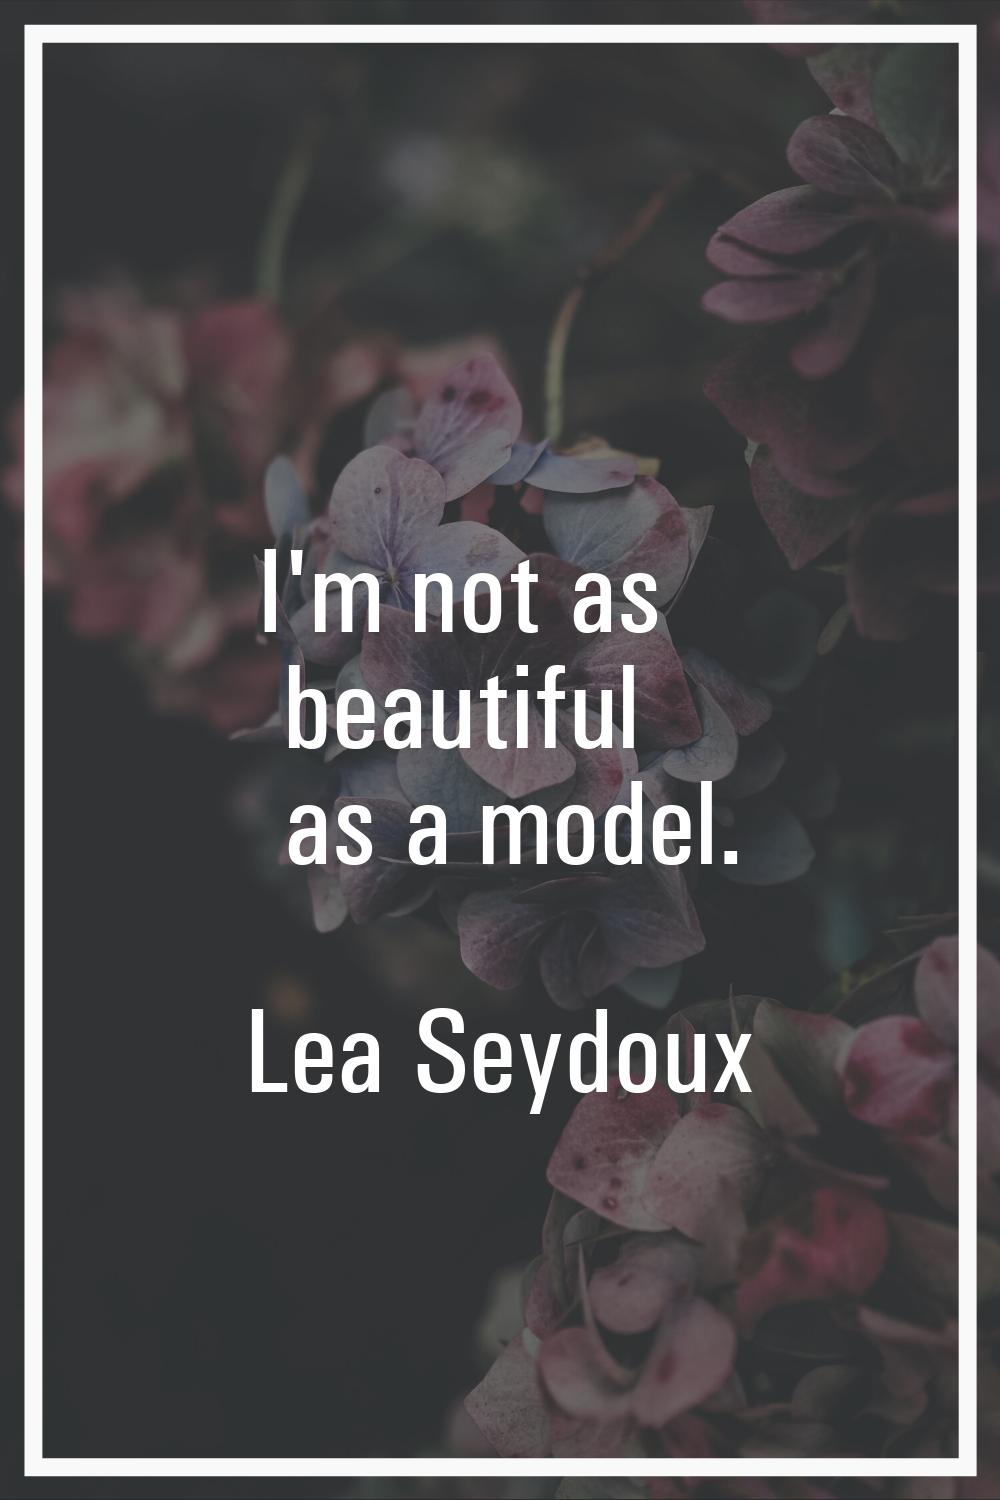 I'm not as beautiful as a model.